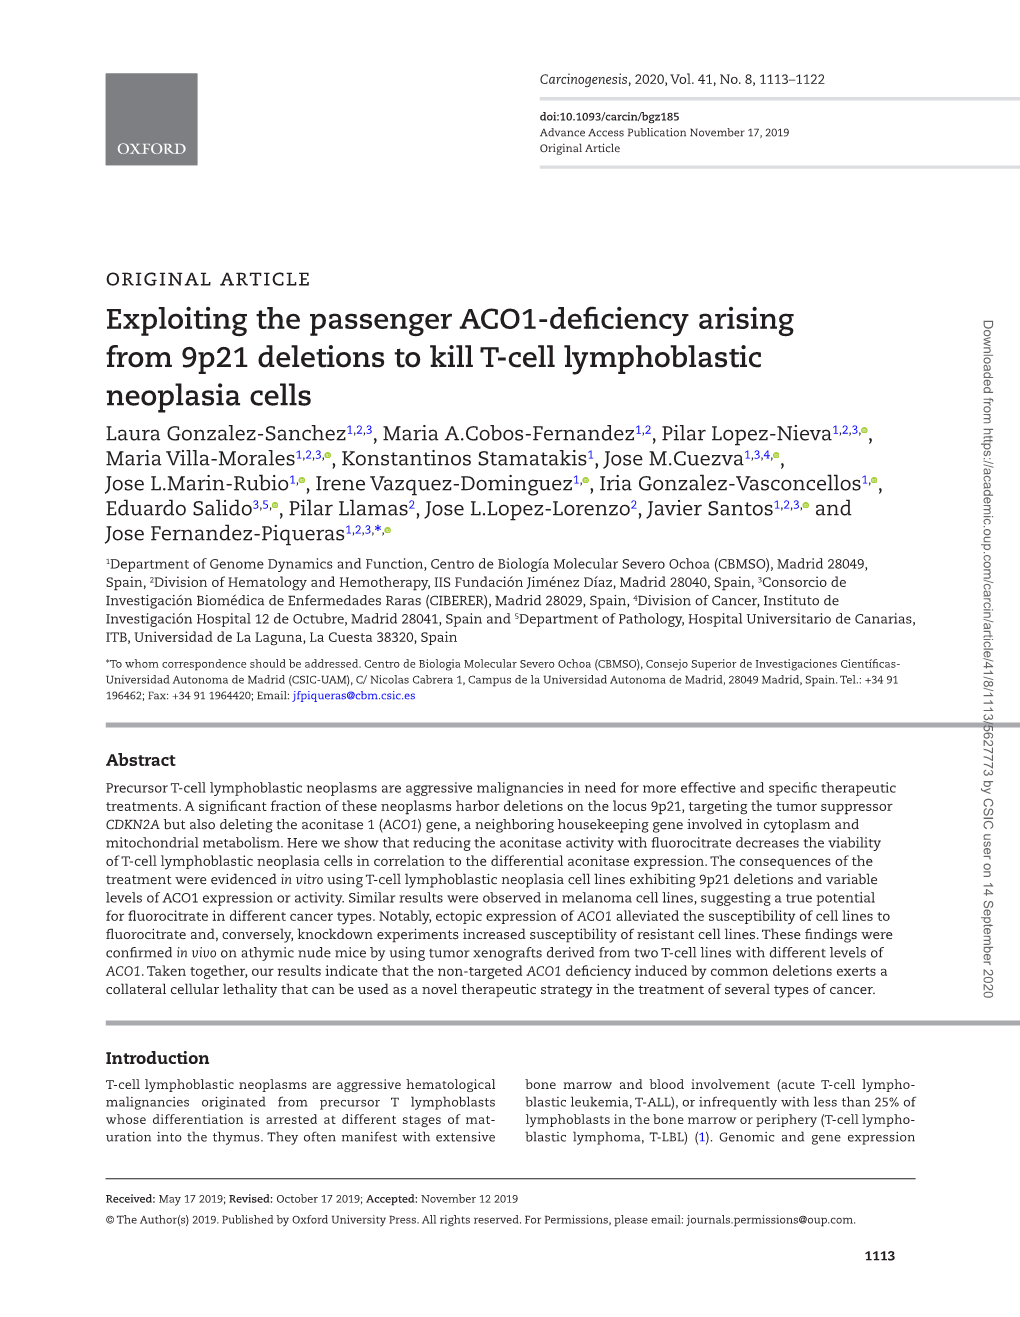 Exploiting the Passenger ACO1-Deficiency Arising from 9P21